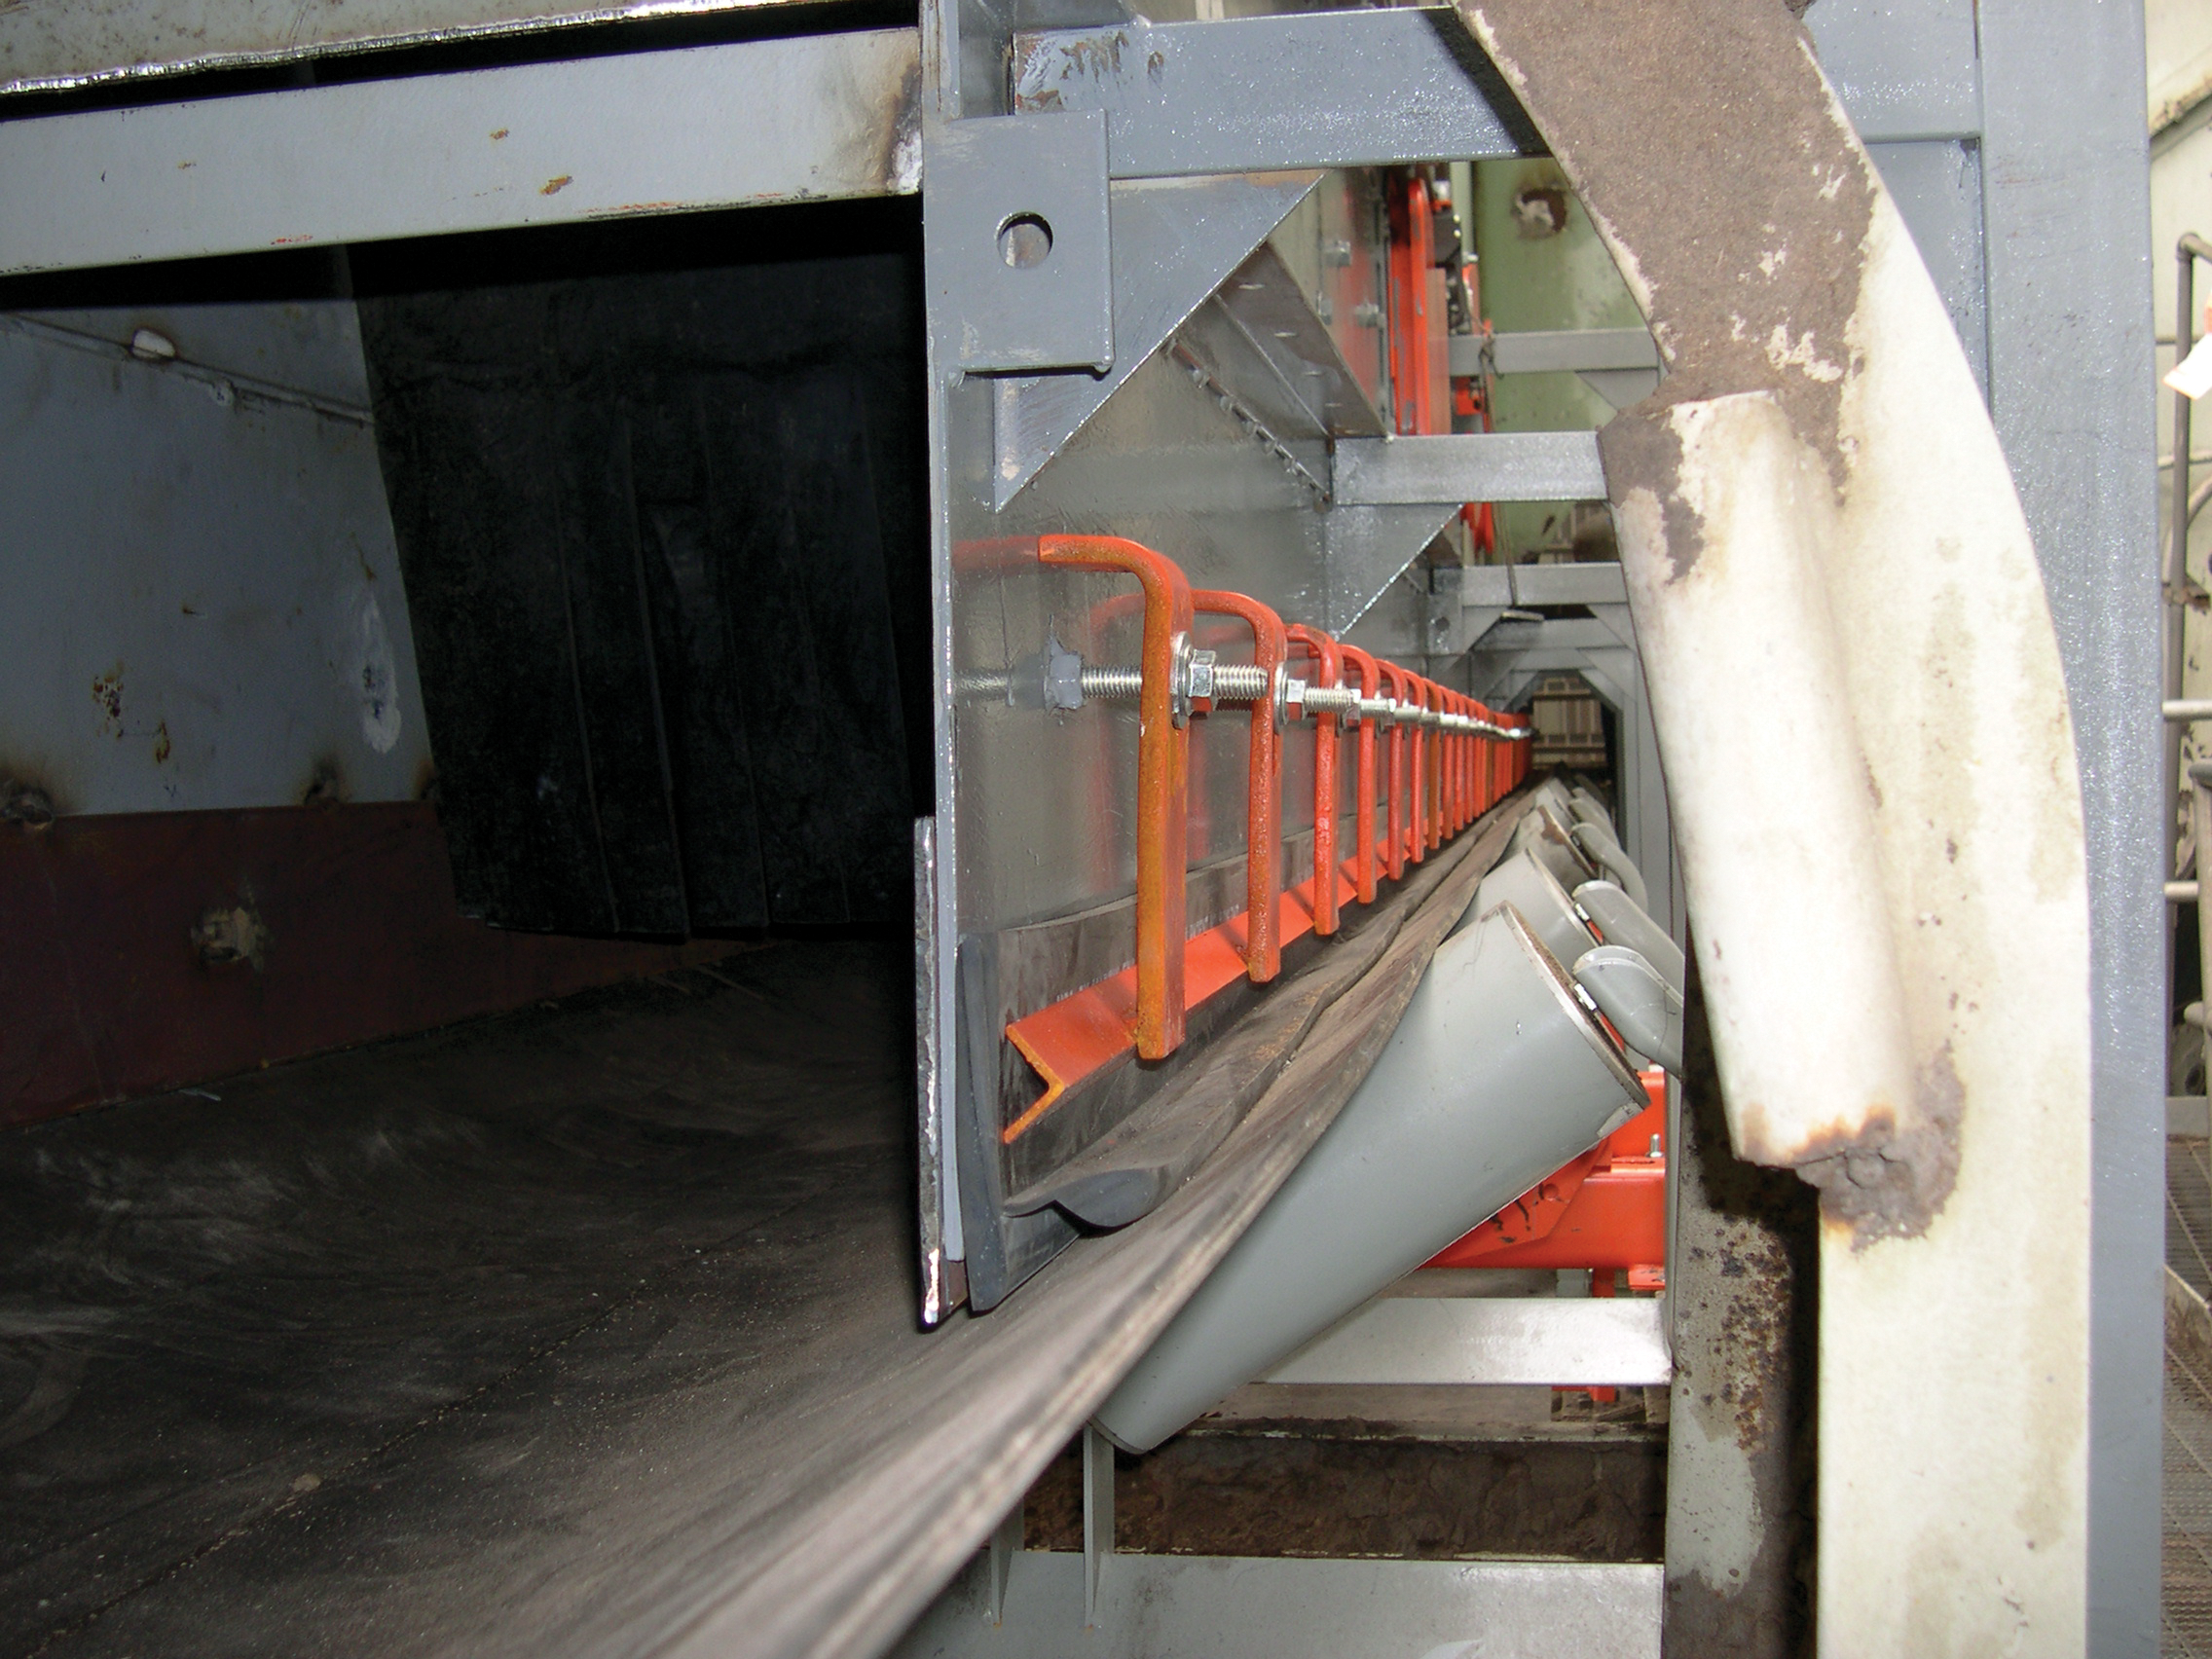 The final variation in sealing systems are those systems that seal on the outside of the skirtboard seal.